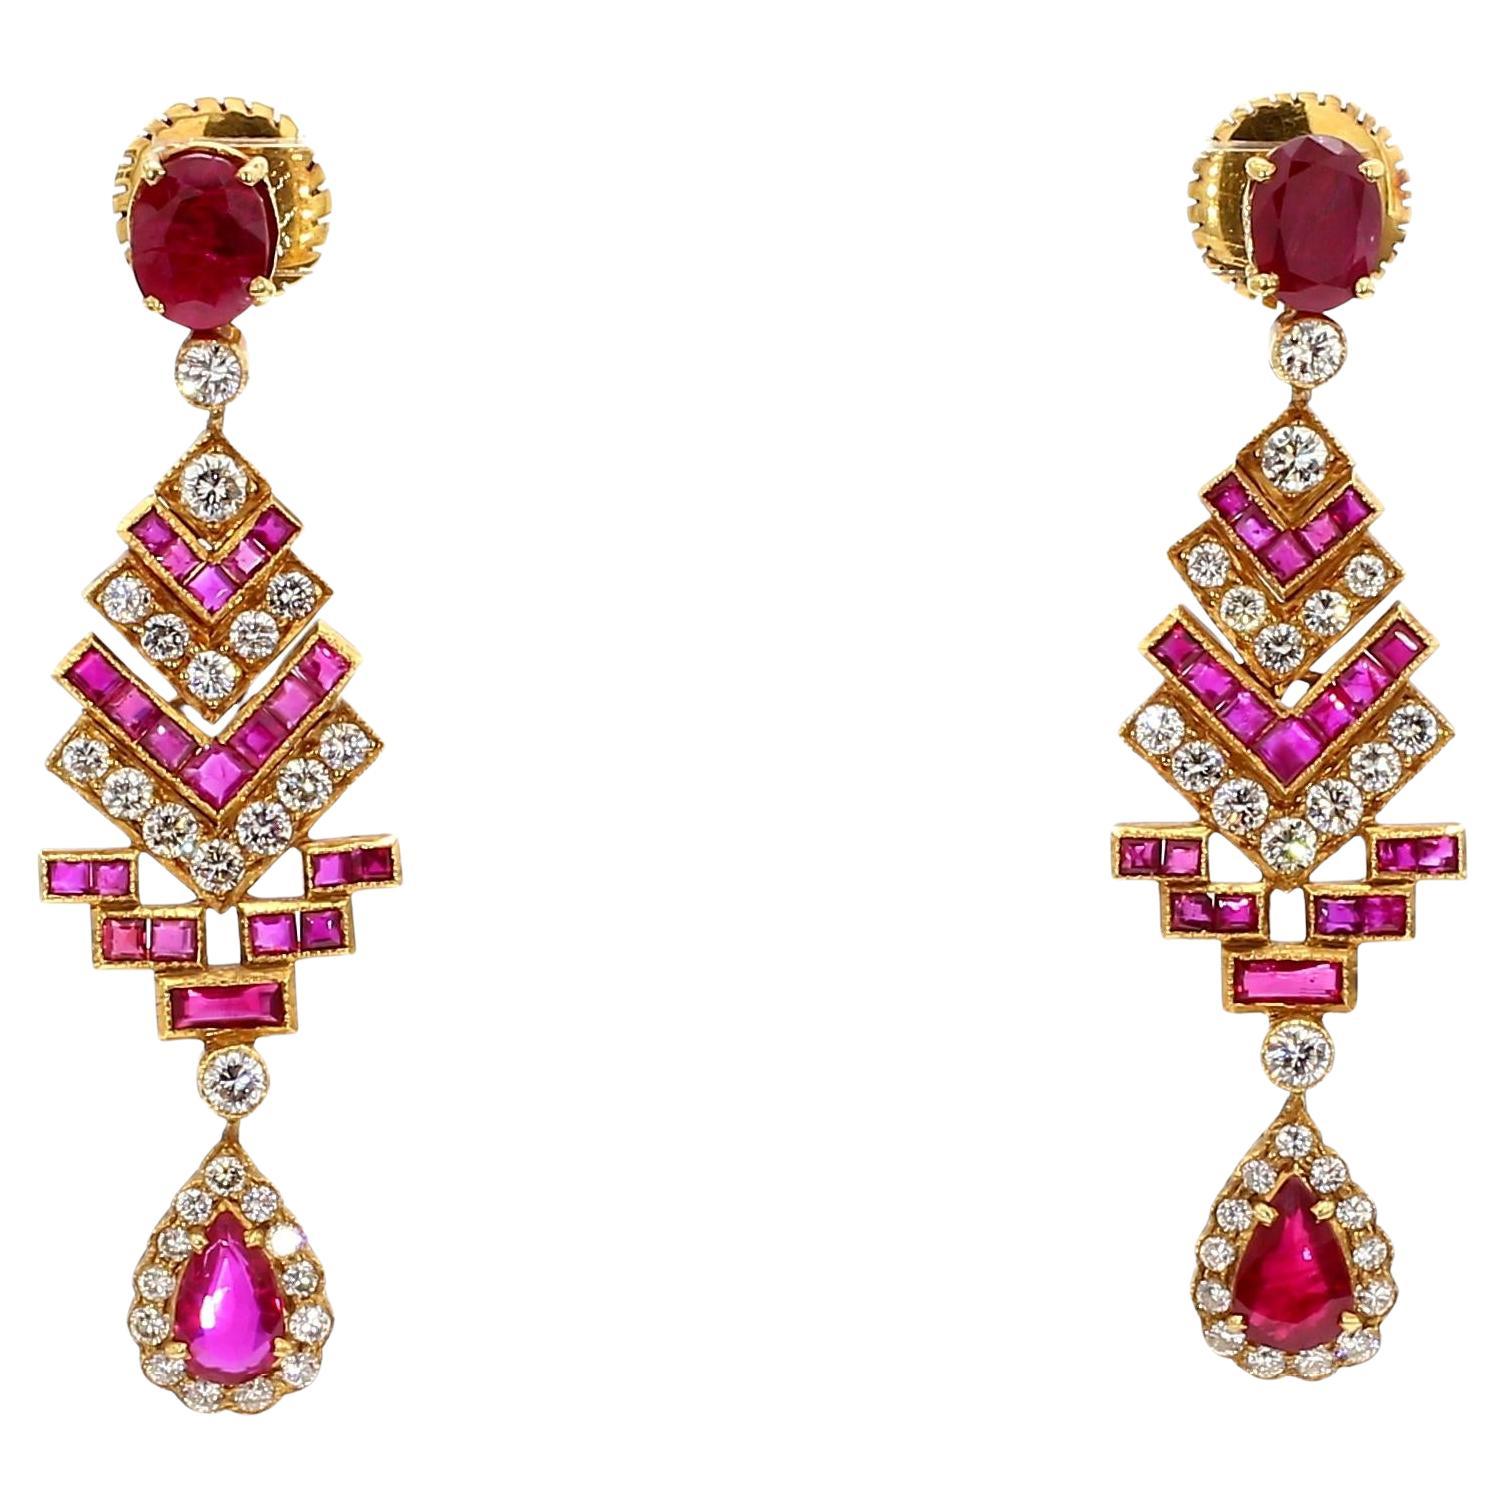 4 Carat Ruby and 3 Carat Diamond Art Deco Style 14K Earrings For Sale